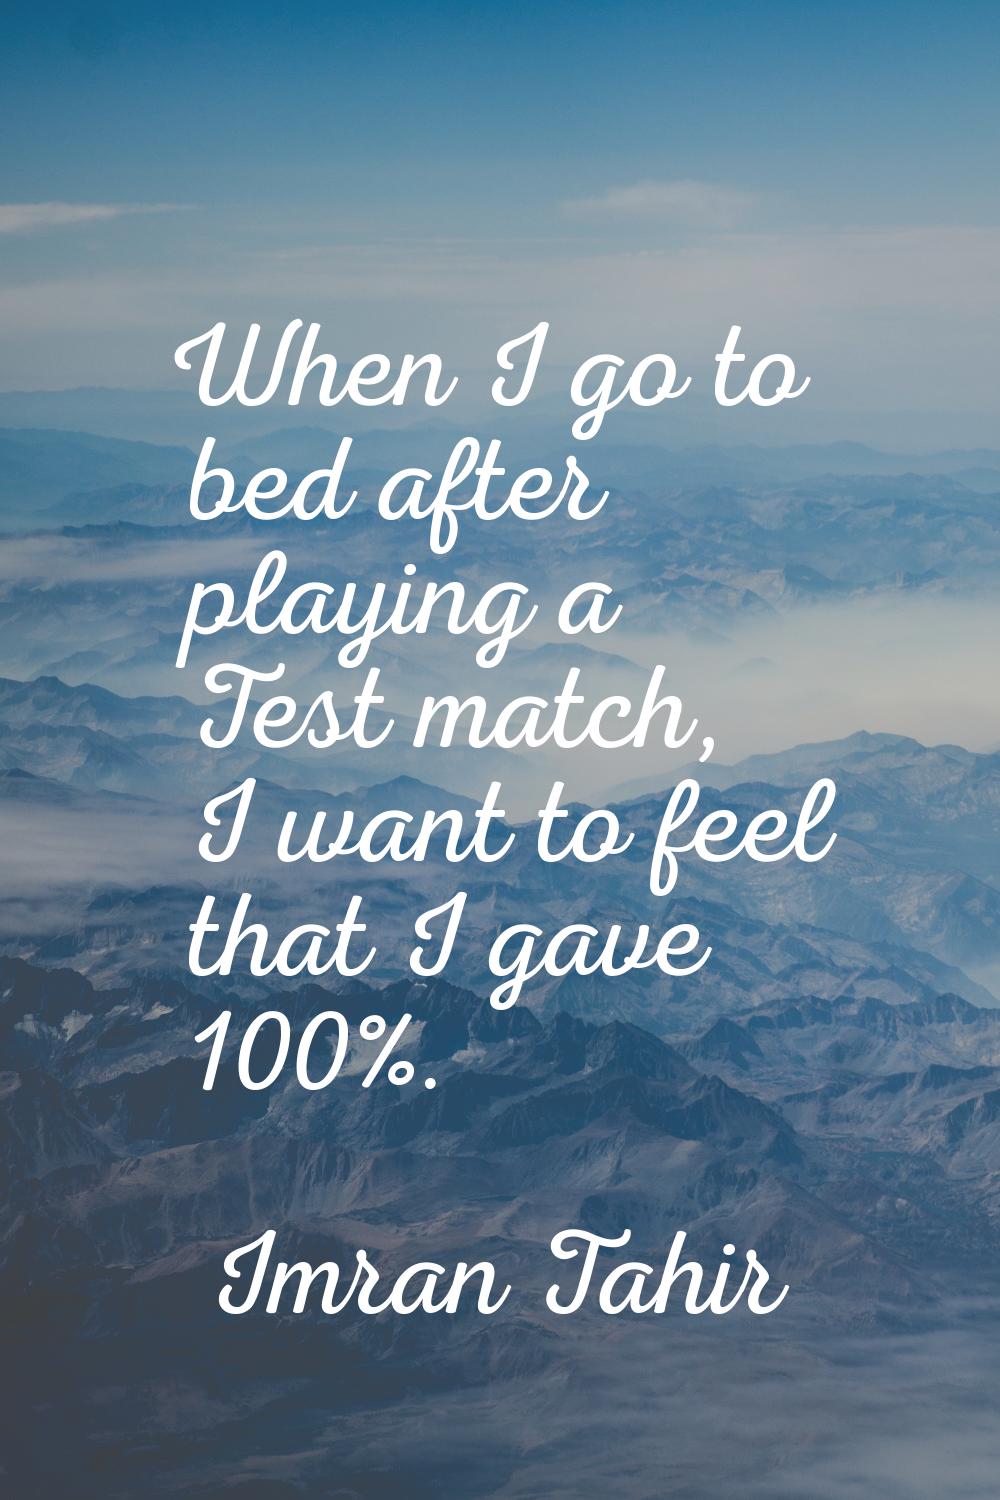 When I go to bed after playing a Test match, I want to feel that I gave 100%.